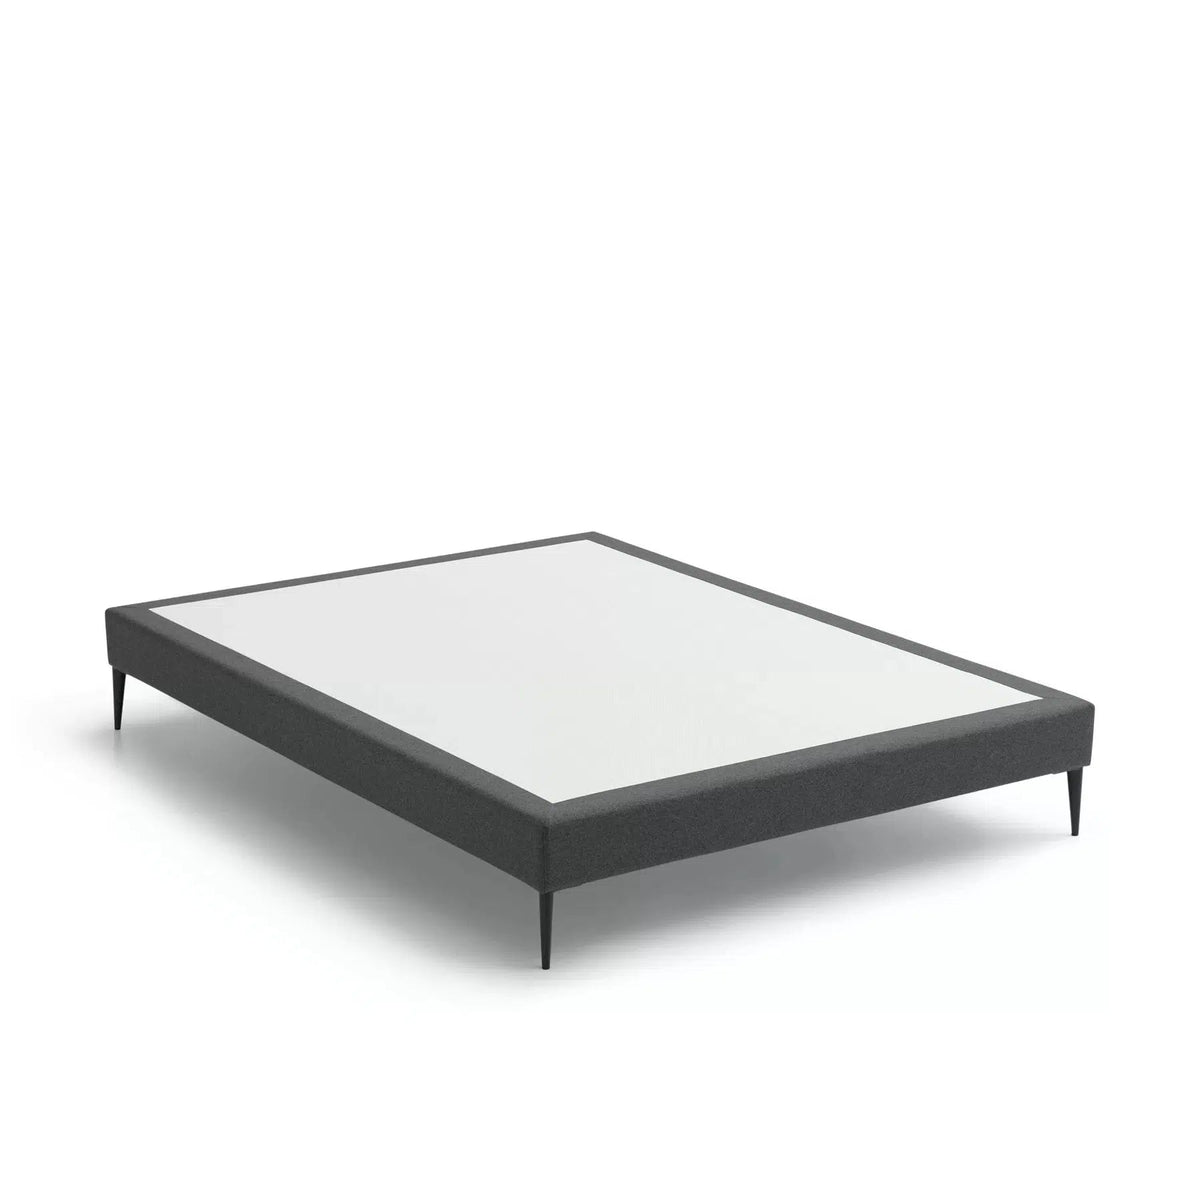 Rina 5201 Bed Base-TM Leader-Contract Furniture Store